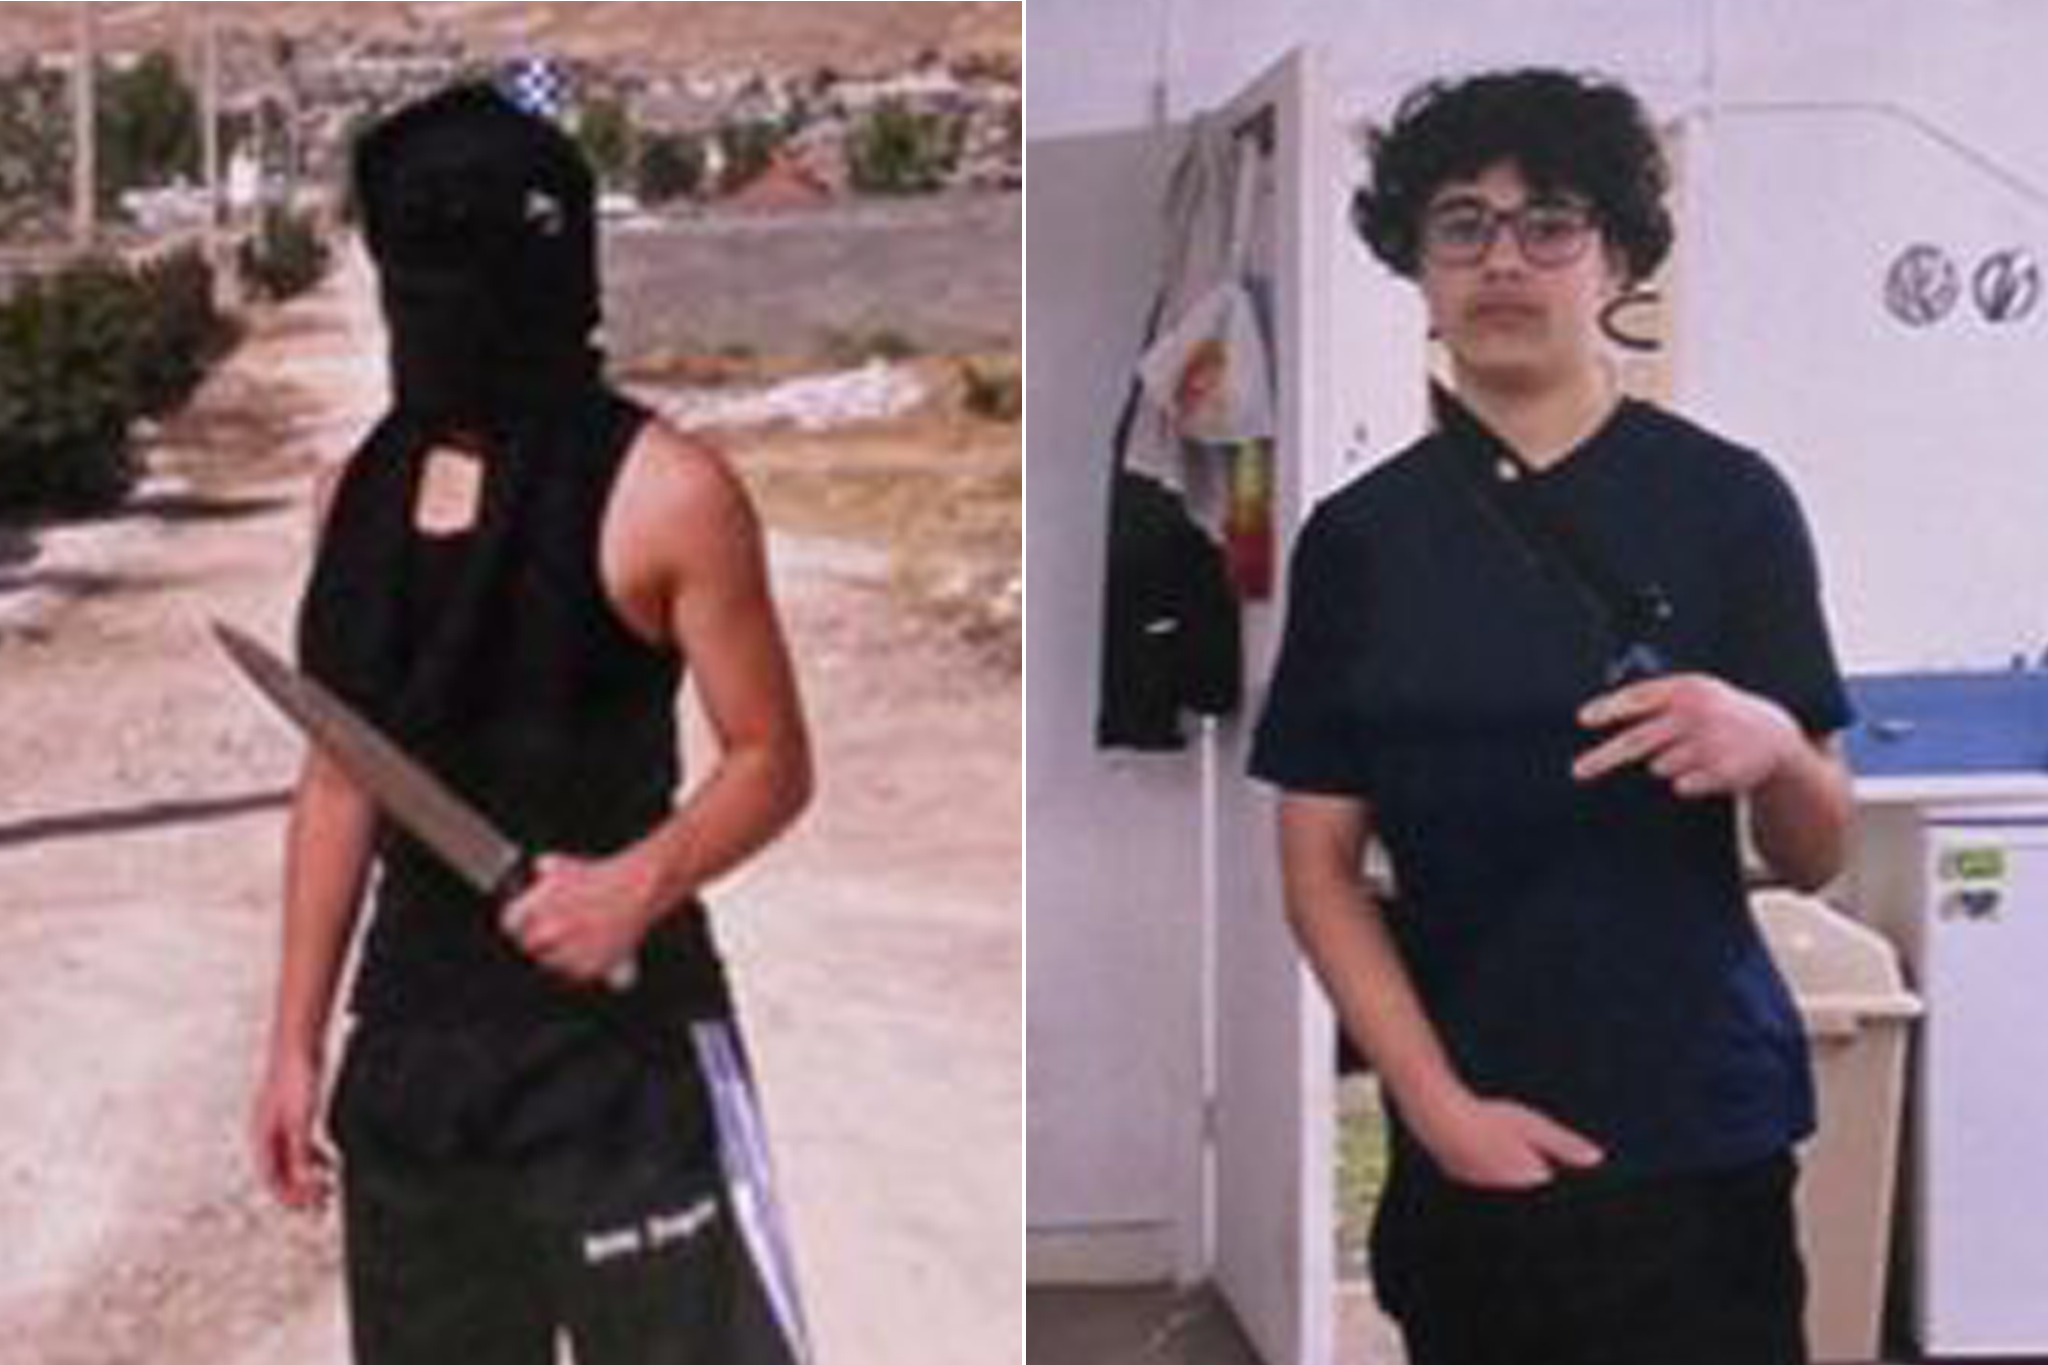 Bardia Shojaeifard, pictured holding a knife, targeted “big hearted” and “caring” Alfie Lewis, 15